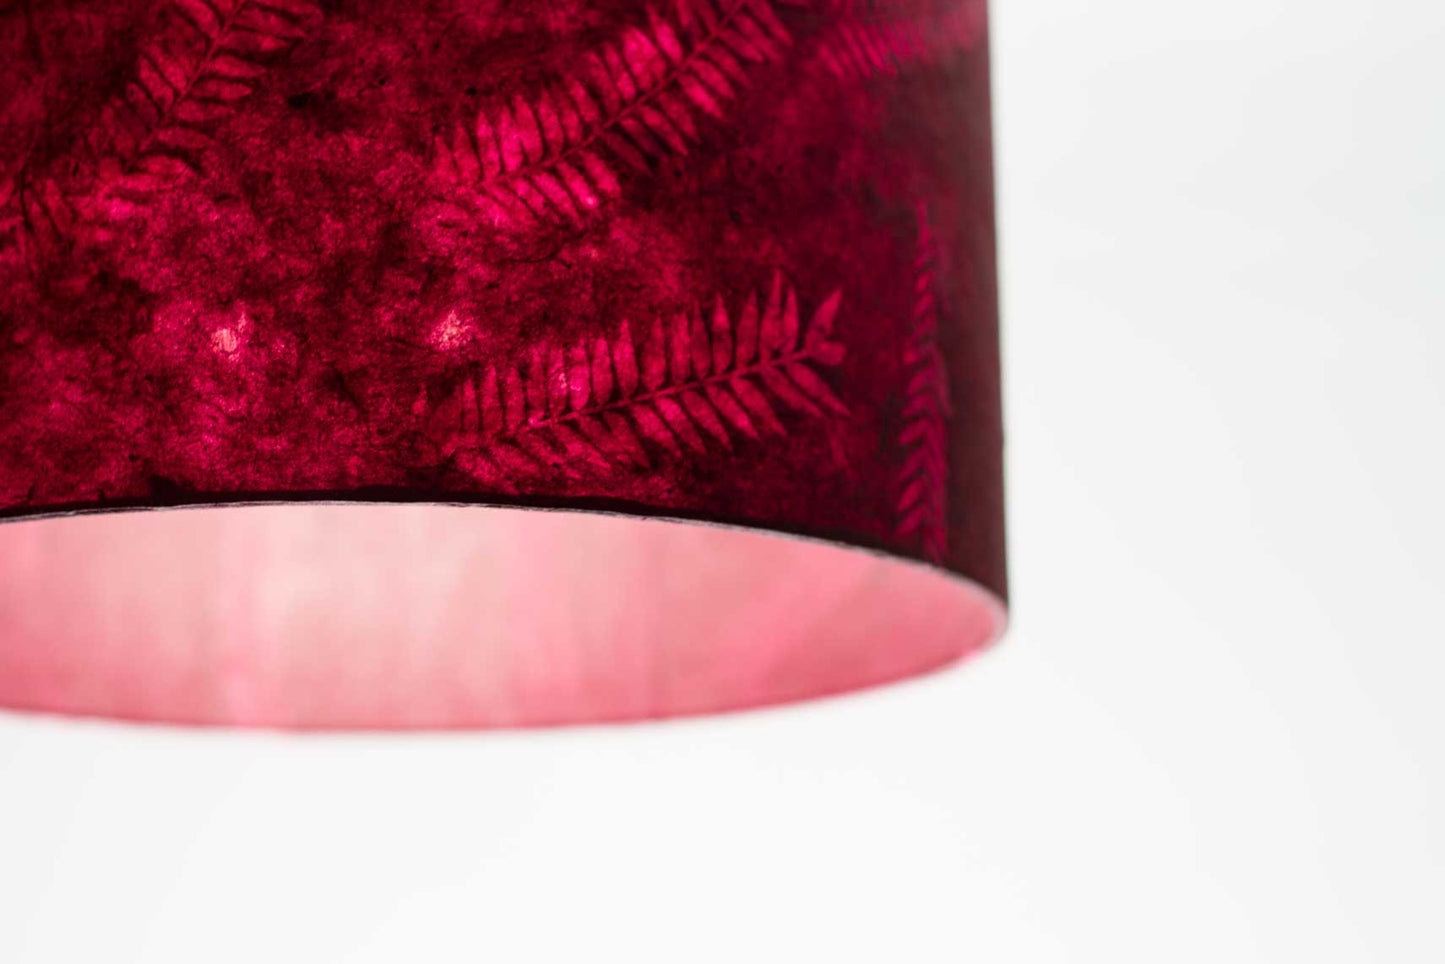 Square Lamp Shade - P25 - Resistance Dyed Pink Fern, 20cm(w) x 30cm(h) x 20cm(d)